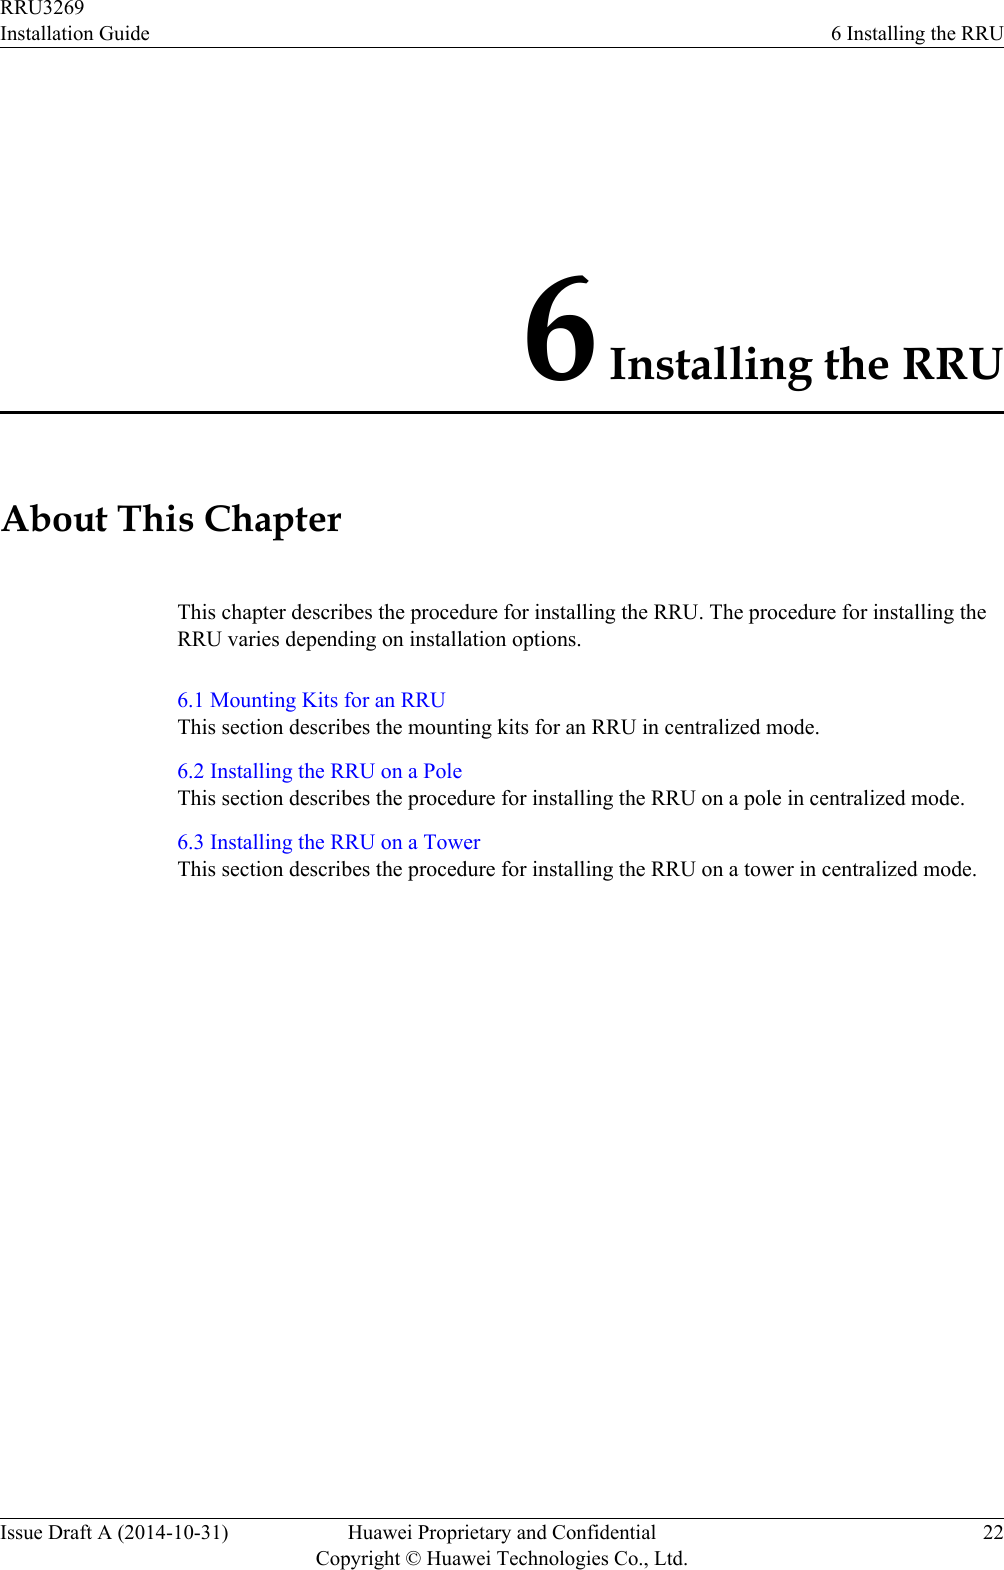 6 Installing the RRUAbout This ChapterThis chapter describes the procedure for installing the RRU. The procedure for installing theRRU varies depending on installation options.6.1 Mounting Kits for an RRUThis section describes the mounting kits for an RRU in centralized mode.6.2 Installing the RRU on a PoleThis section describes the procedure for installing the RRU on a pole in centralized mode.6.3 Installing the RRU on a TowerThis section describes the procedure for installing the RRU on a tower in centralized mode.RRU3269Installation Guide 6 Installing the RRUIssue Draft A (2014-10-31) Huawei Proprietary and ConfidentialCopyright © Huawei Technologies Co., Ltd.22